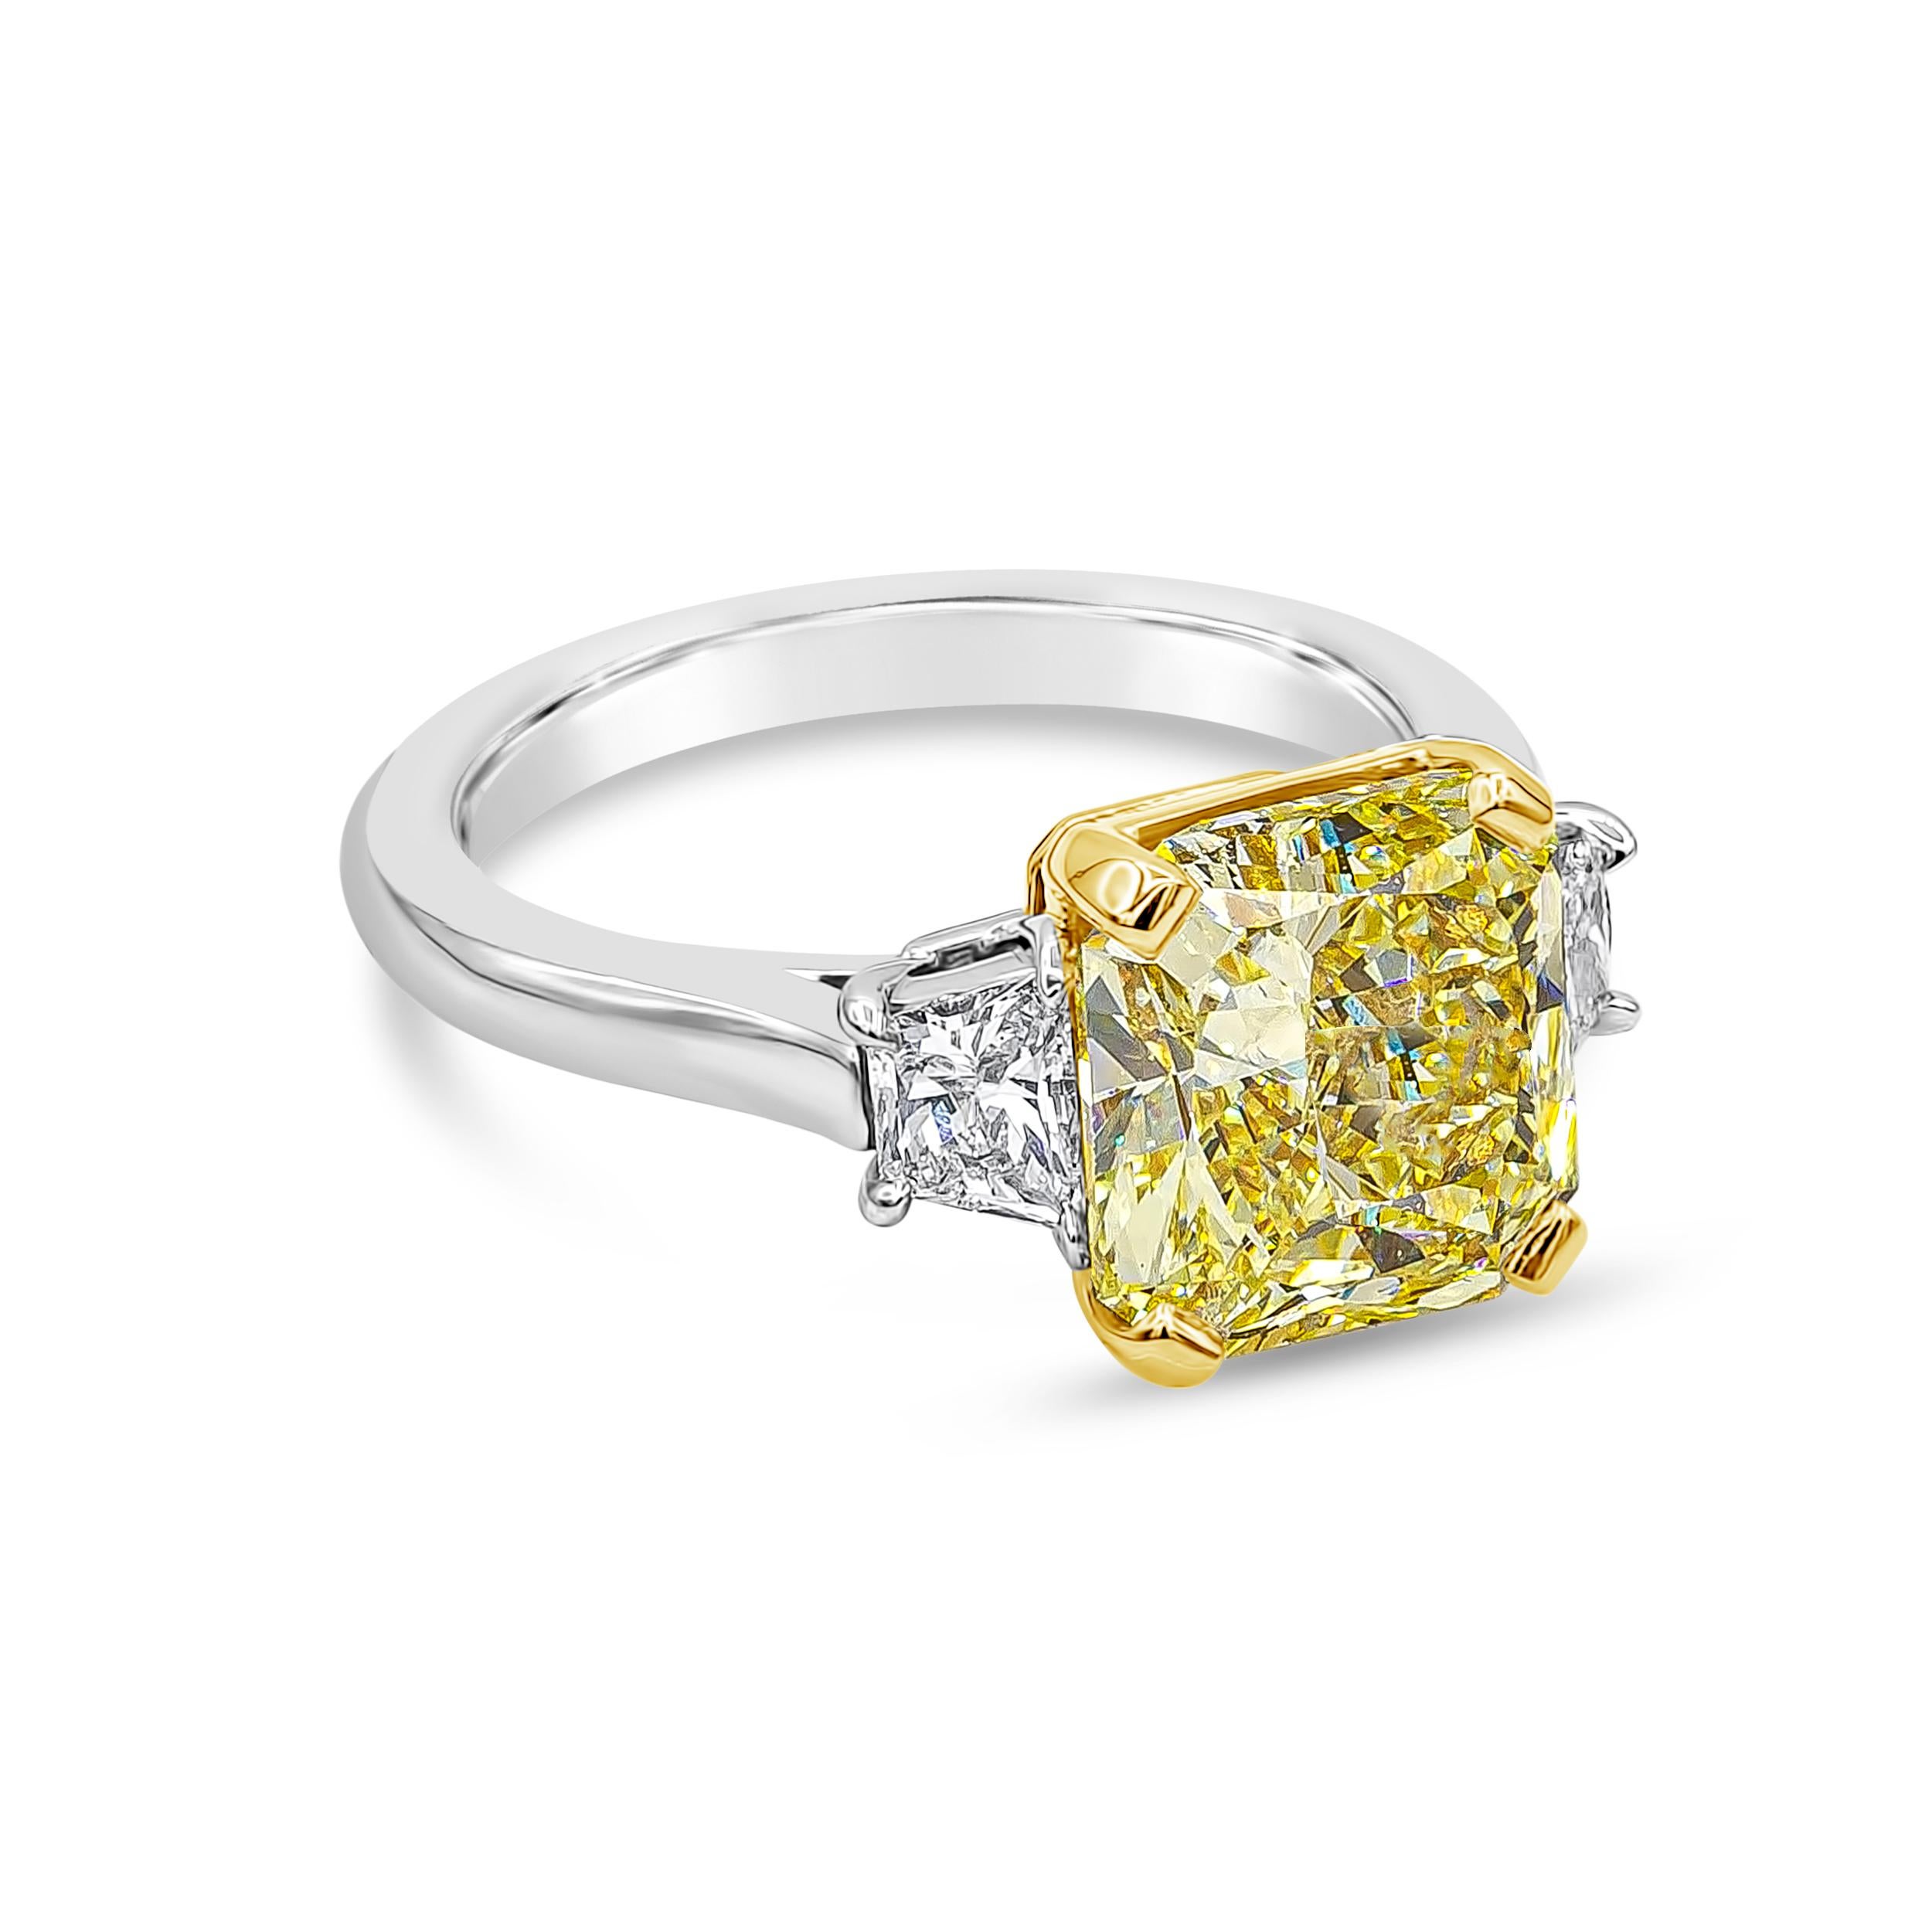 Well crafted high end engagement ring showcasing a GIA certified color-rich fancy yellow color 3.64 carats radiant cut diamond, VS1 in clarity. Accented with trillion diamonds on each side weighing 0.56 carats total and is set and finely made in